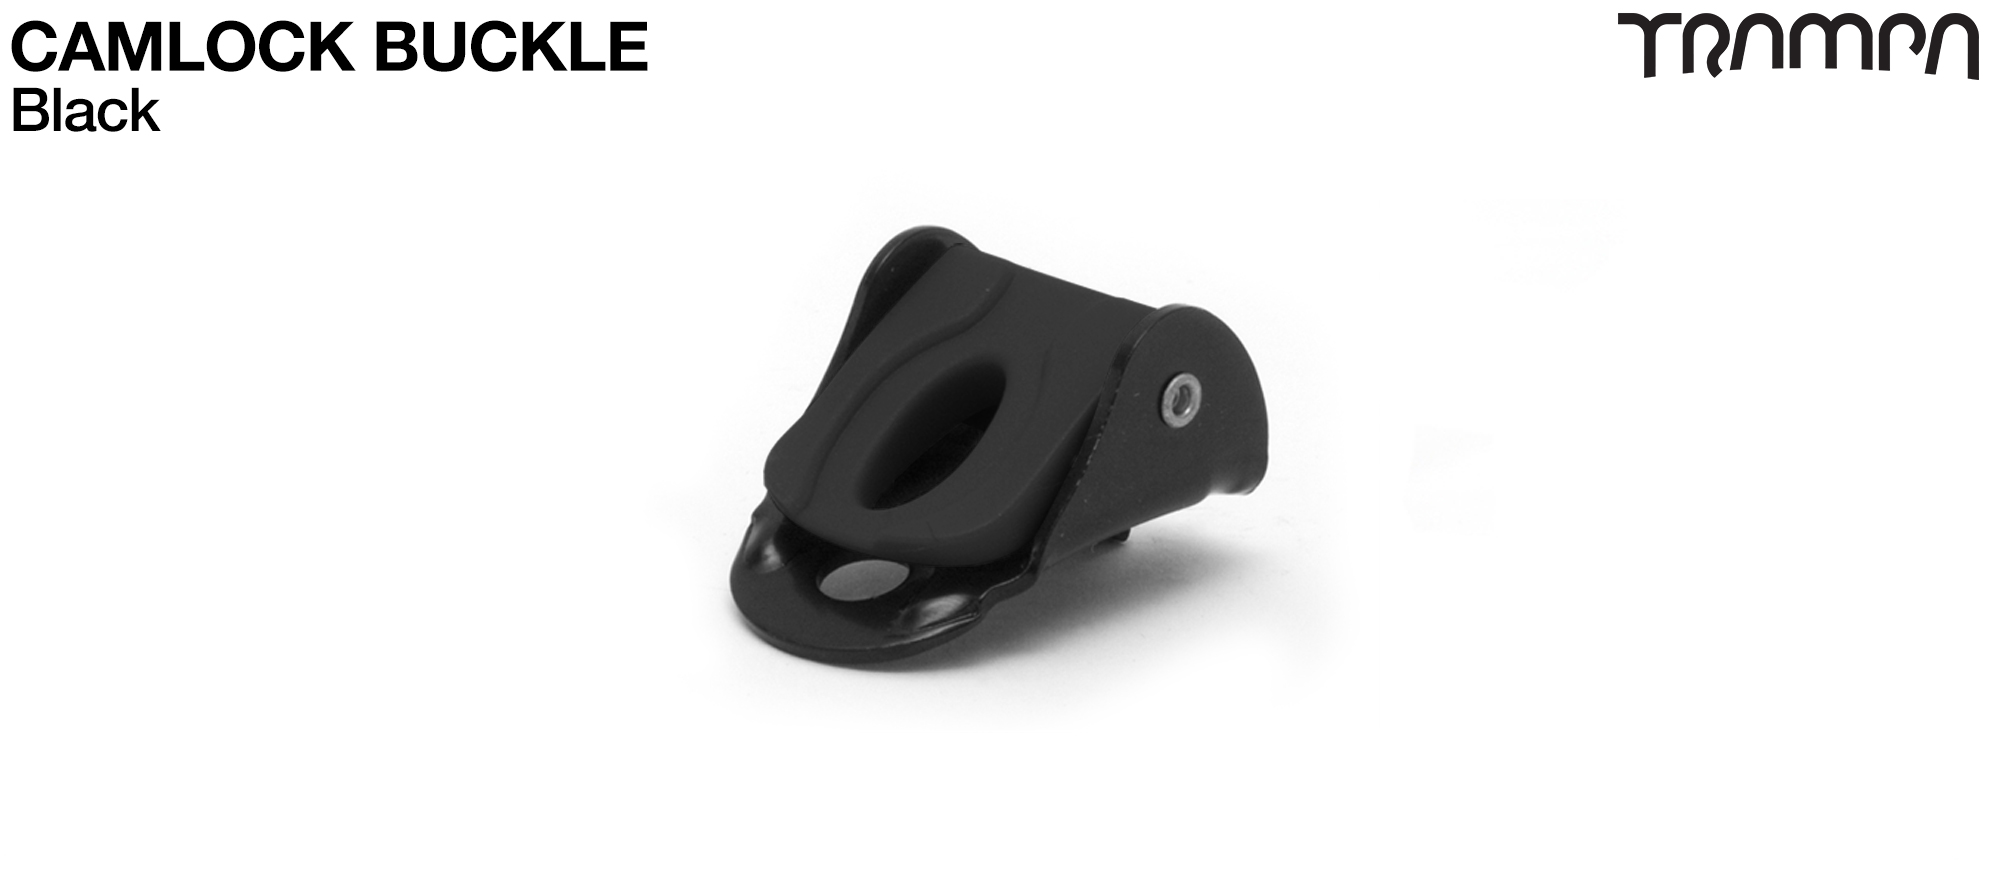 BLACK Camlock Buckle - OUT OF STOCK